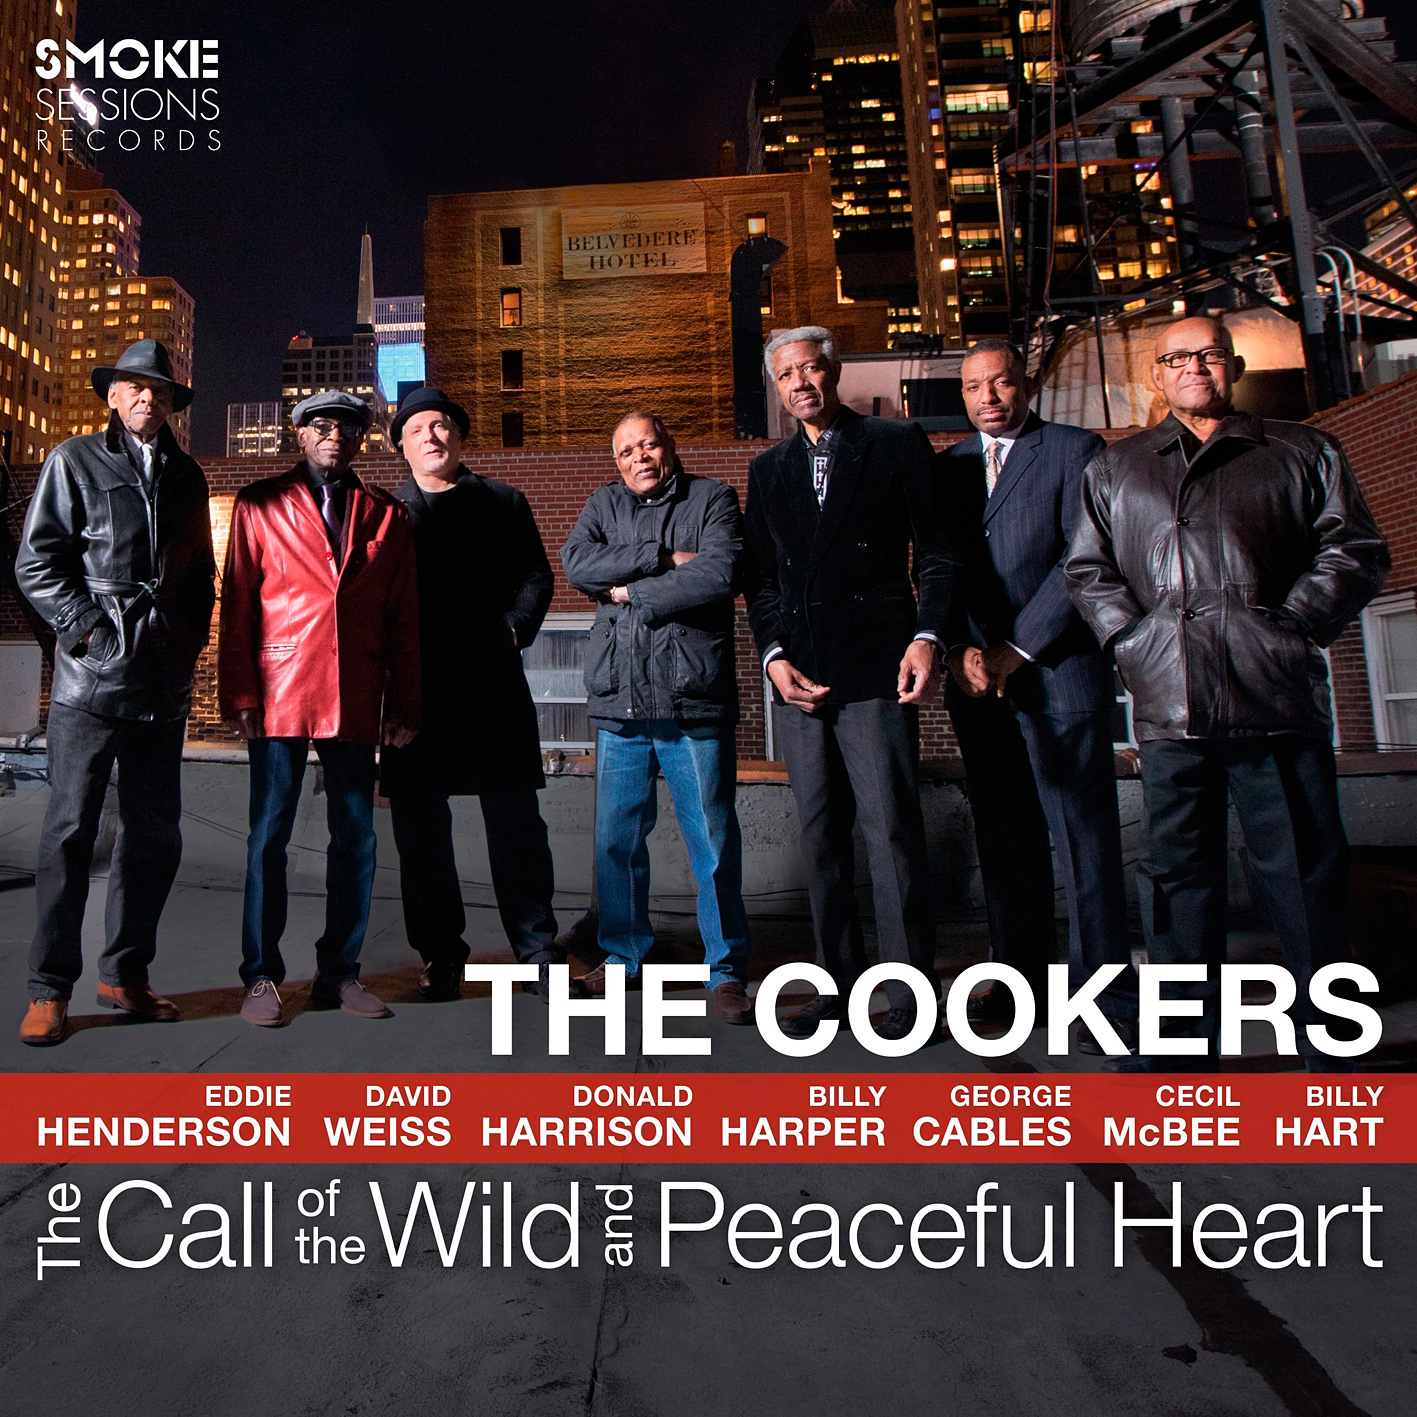 The Cookers – The Call Of The Wild And Peaceful Heart (2016) [HDTracks FLAC 24bit/96kHz]